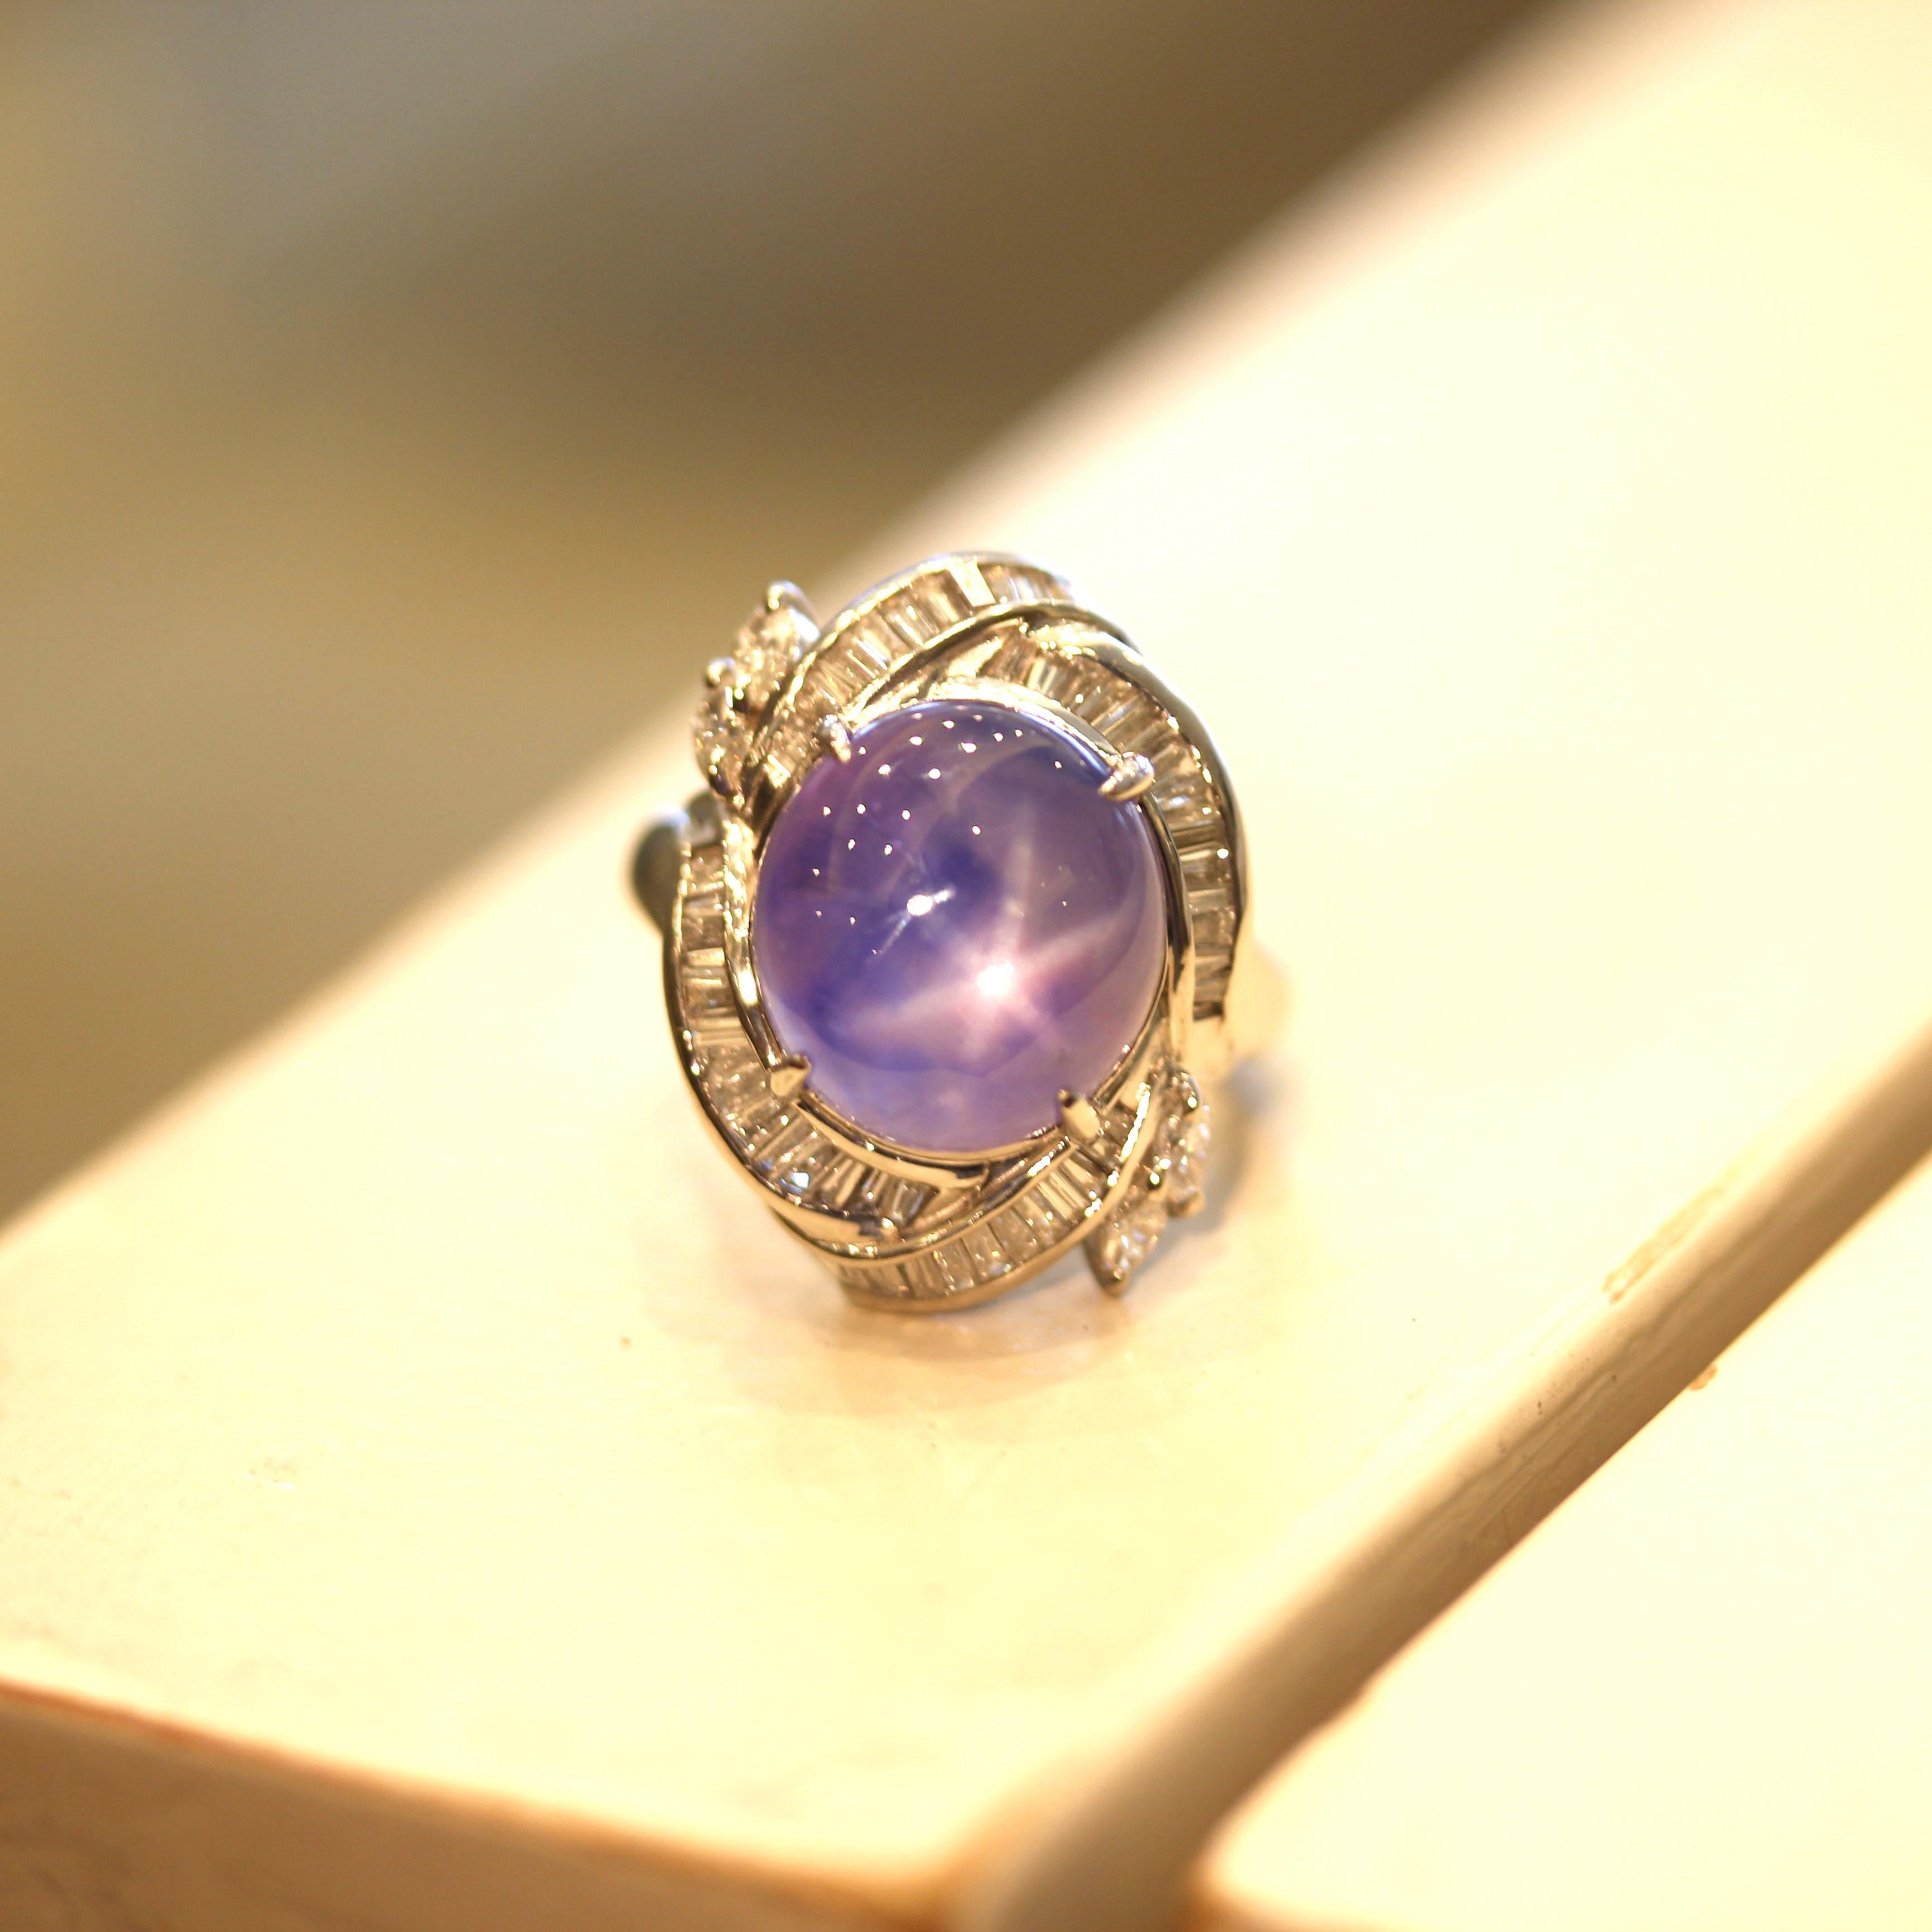 A large and impressive star sapphire weighing 15.81 carats which has a bright vivid purple-blue color and an excellent 6-rayed star. Adding to that, the sapphire is unheated and not treated in any way. It is complemented by 0.95 carats of diamonds